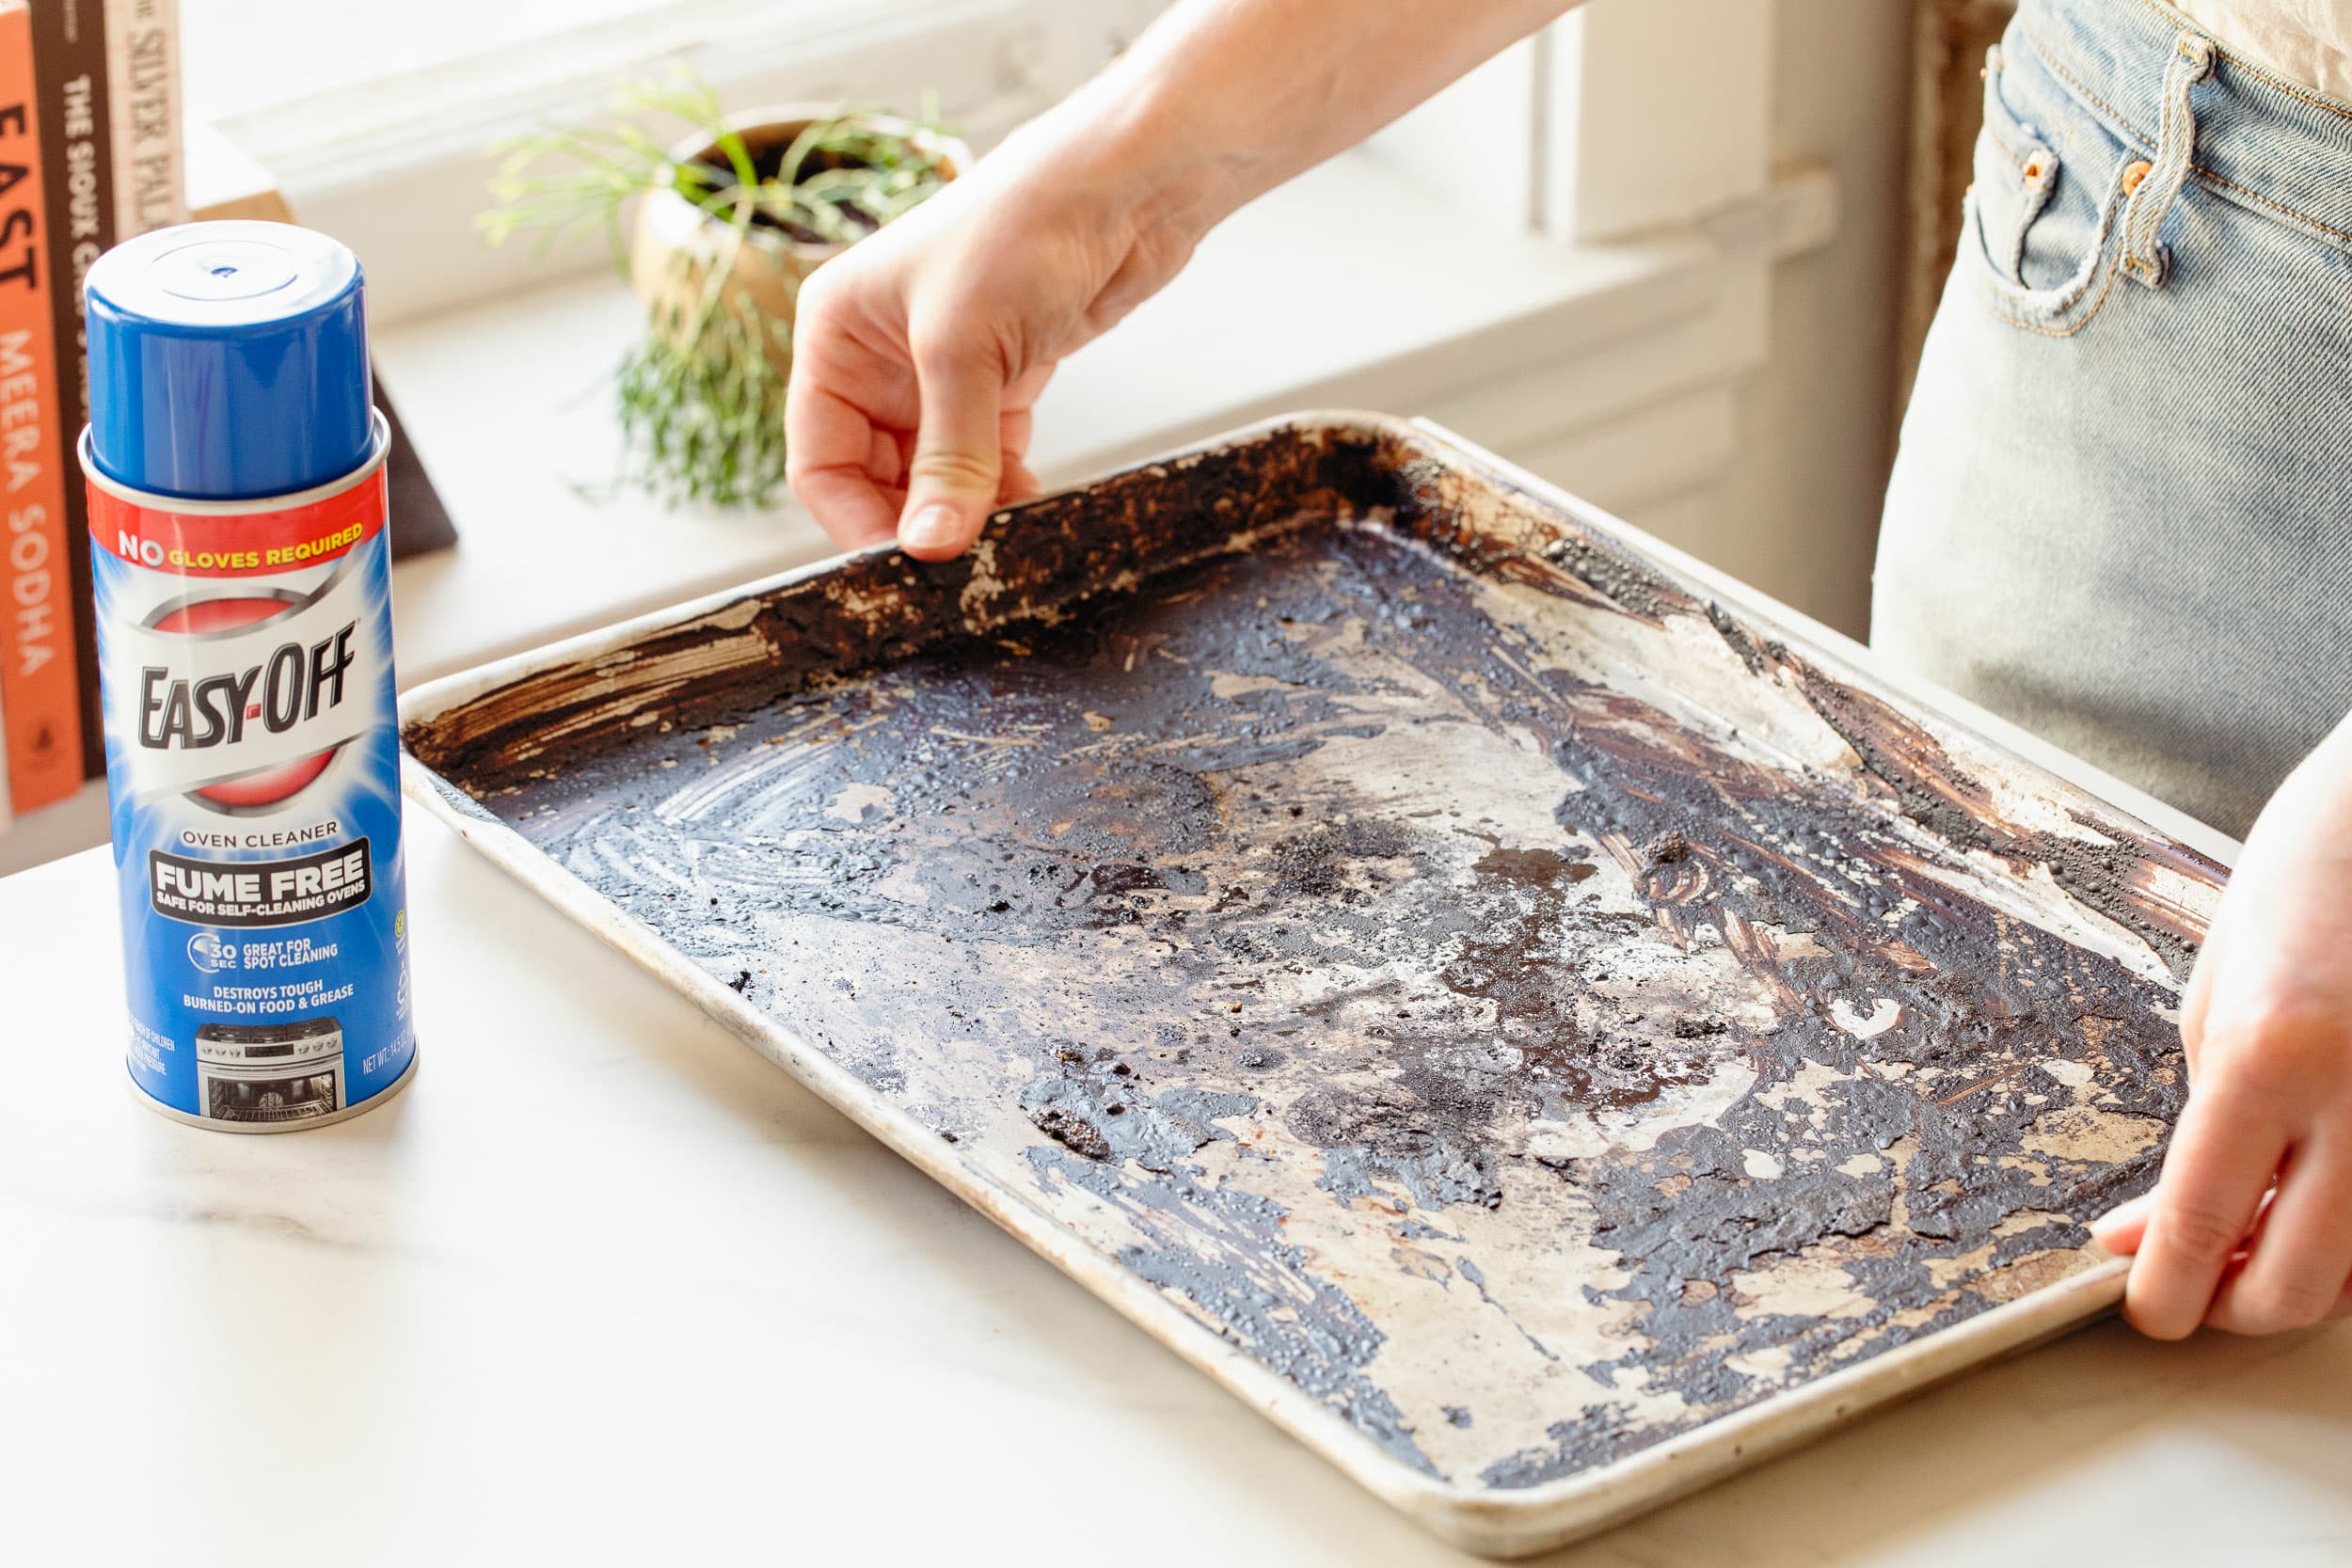 https://cdn.apartmenttherapy.info/image/upload/v1616856626/k/Photo/Lifestyle/2021-04-I-Used-Oven-Cleaner-To-Clean-My-Dirty-Baking-Sheets/Kitchn-2021-Easy-Off-Baking-Pans-1.jpg